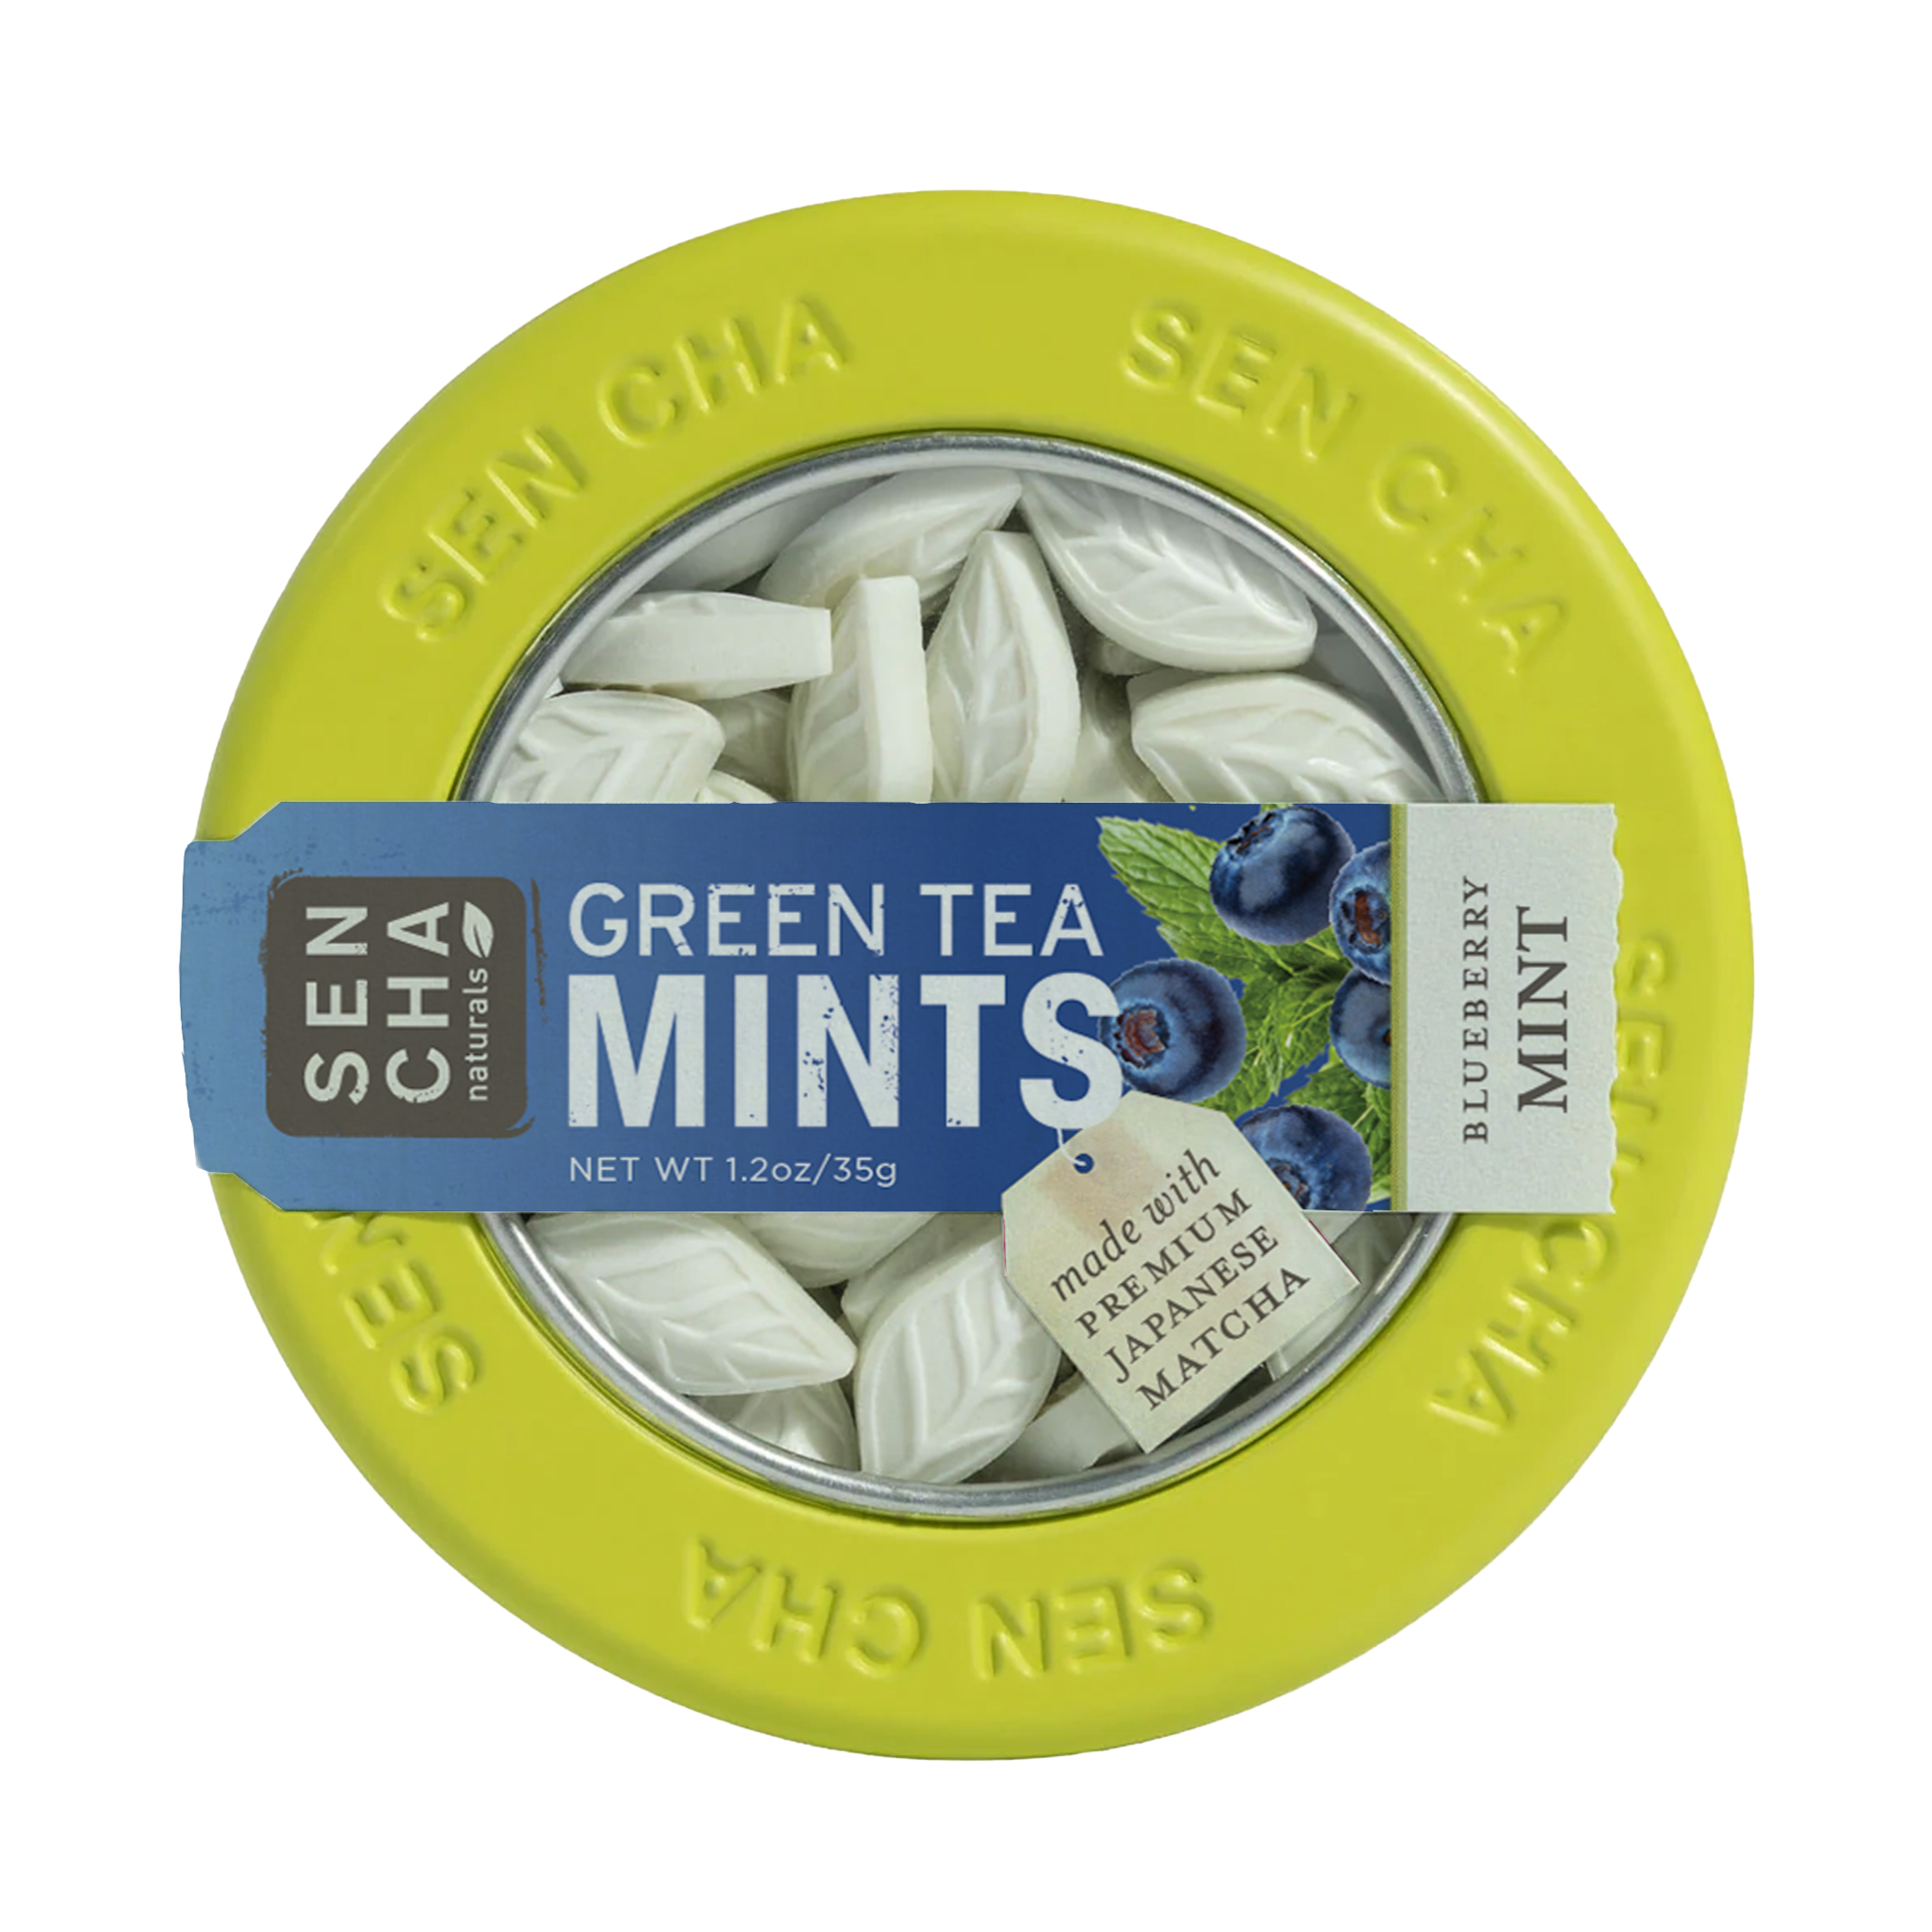 Green Tea Mints - Blueberry | Mint Canister 6 Pack